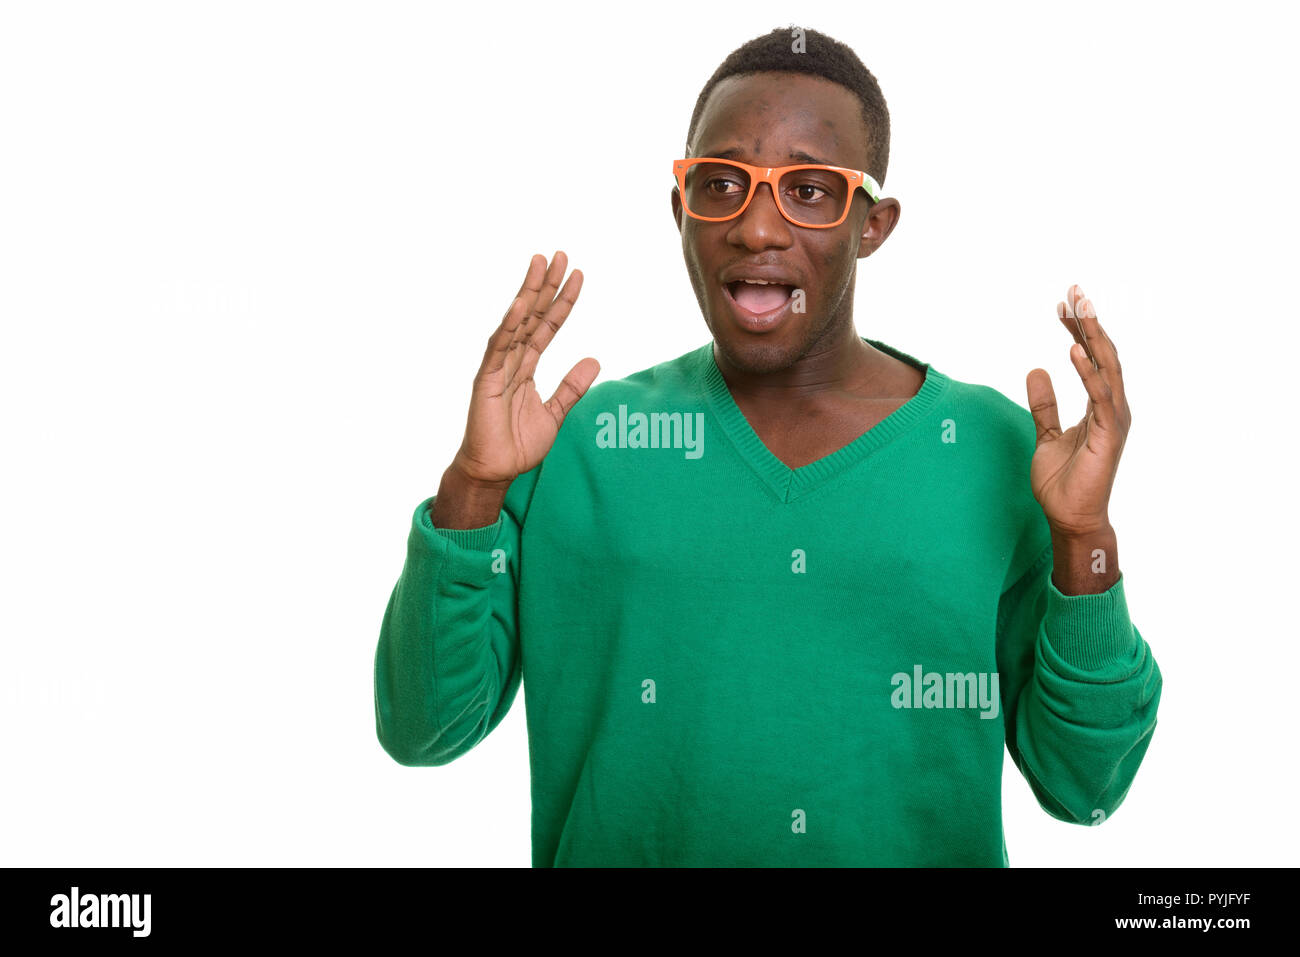 Portrait of young African man looking excited Stock Photo